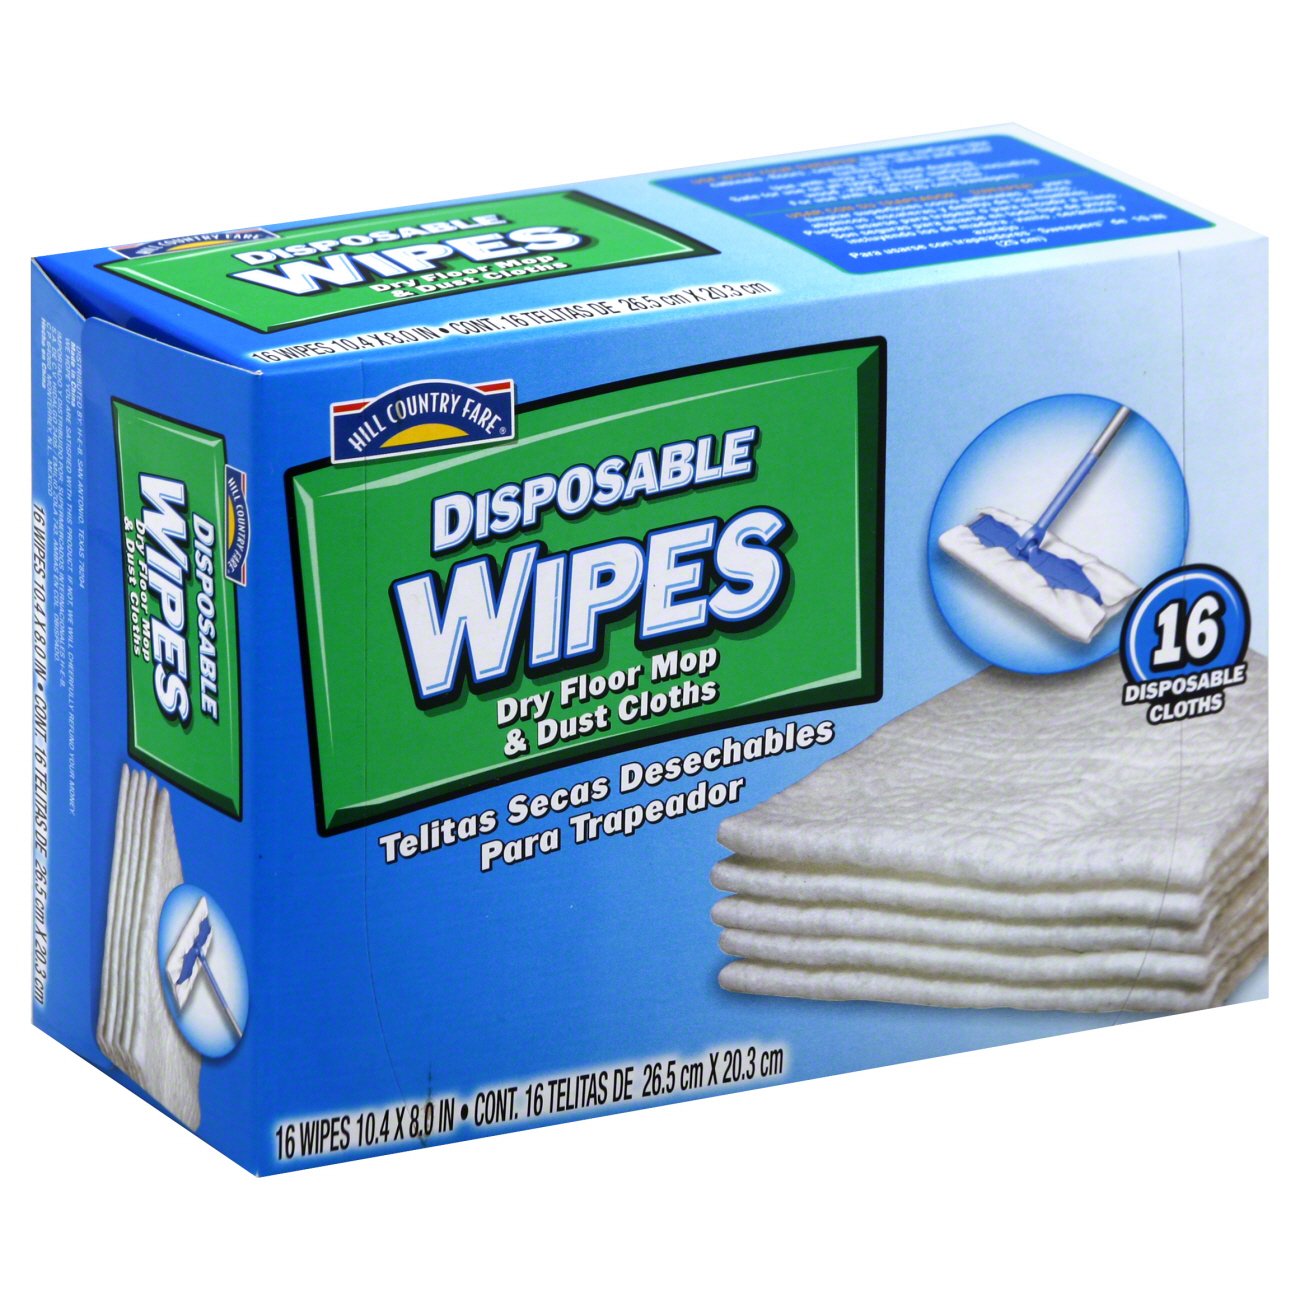 Hill Country Fare Dry Floor Mop & Dust Cloths Disposable Wipes